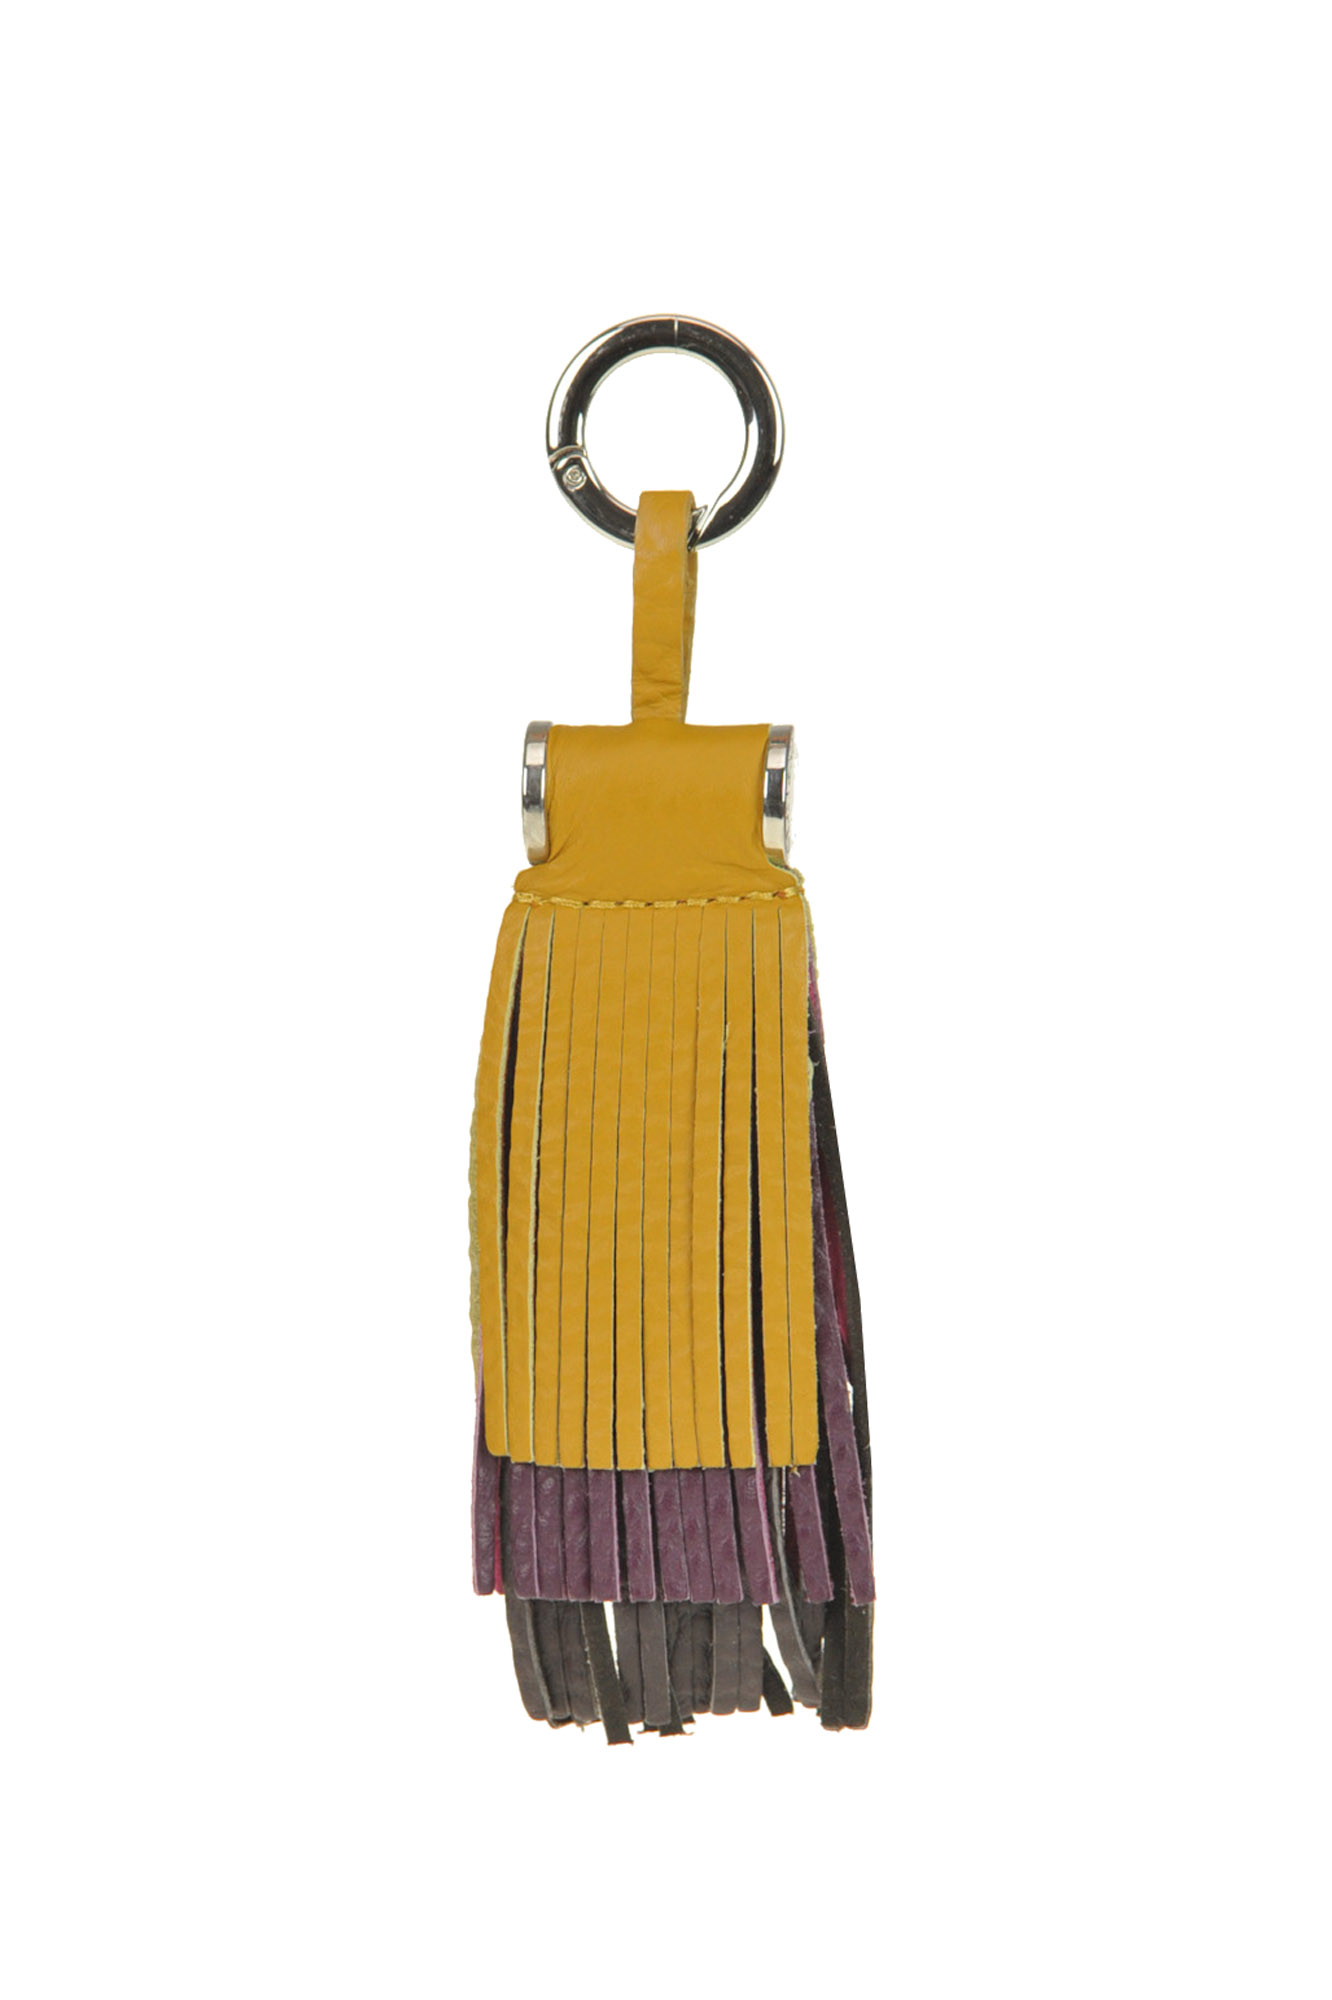 Orciani Soft Trio Leather Charm In Mustard